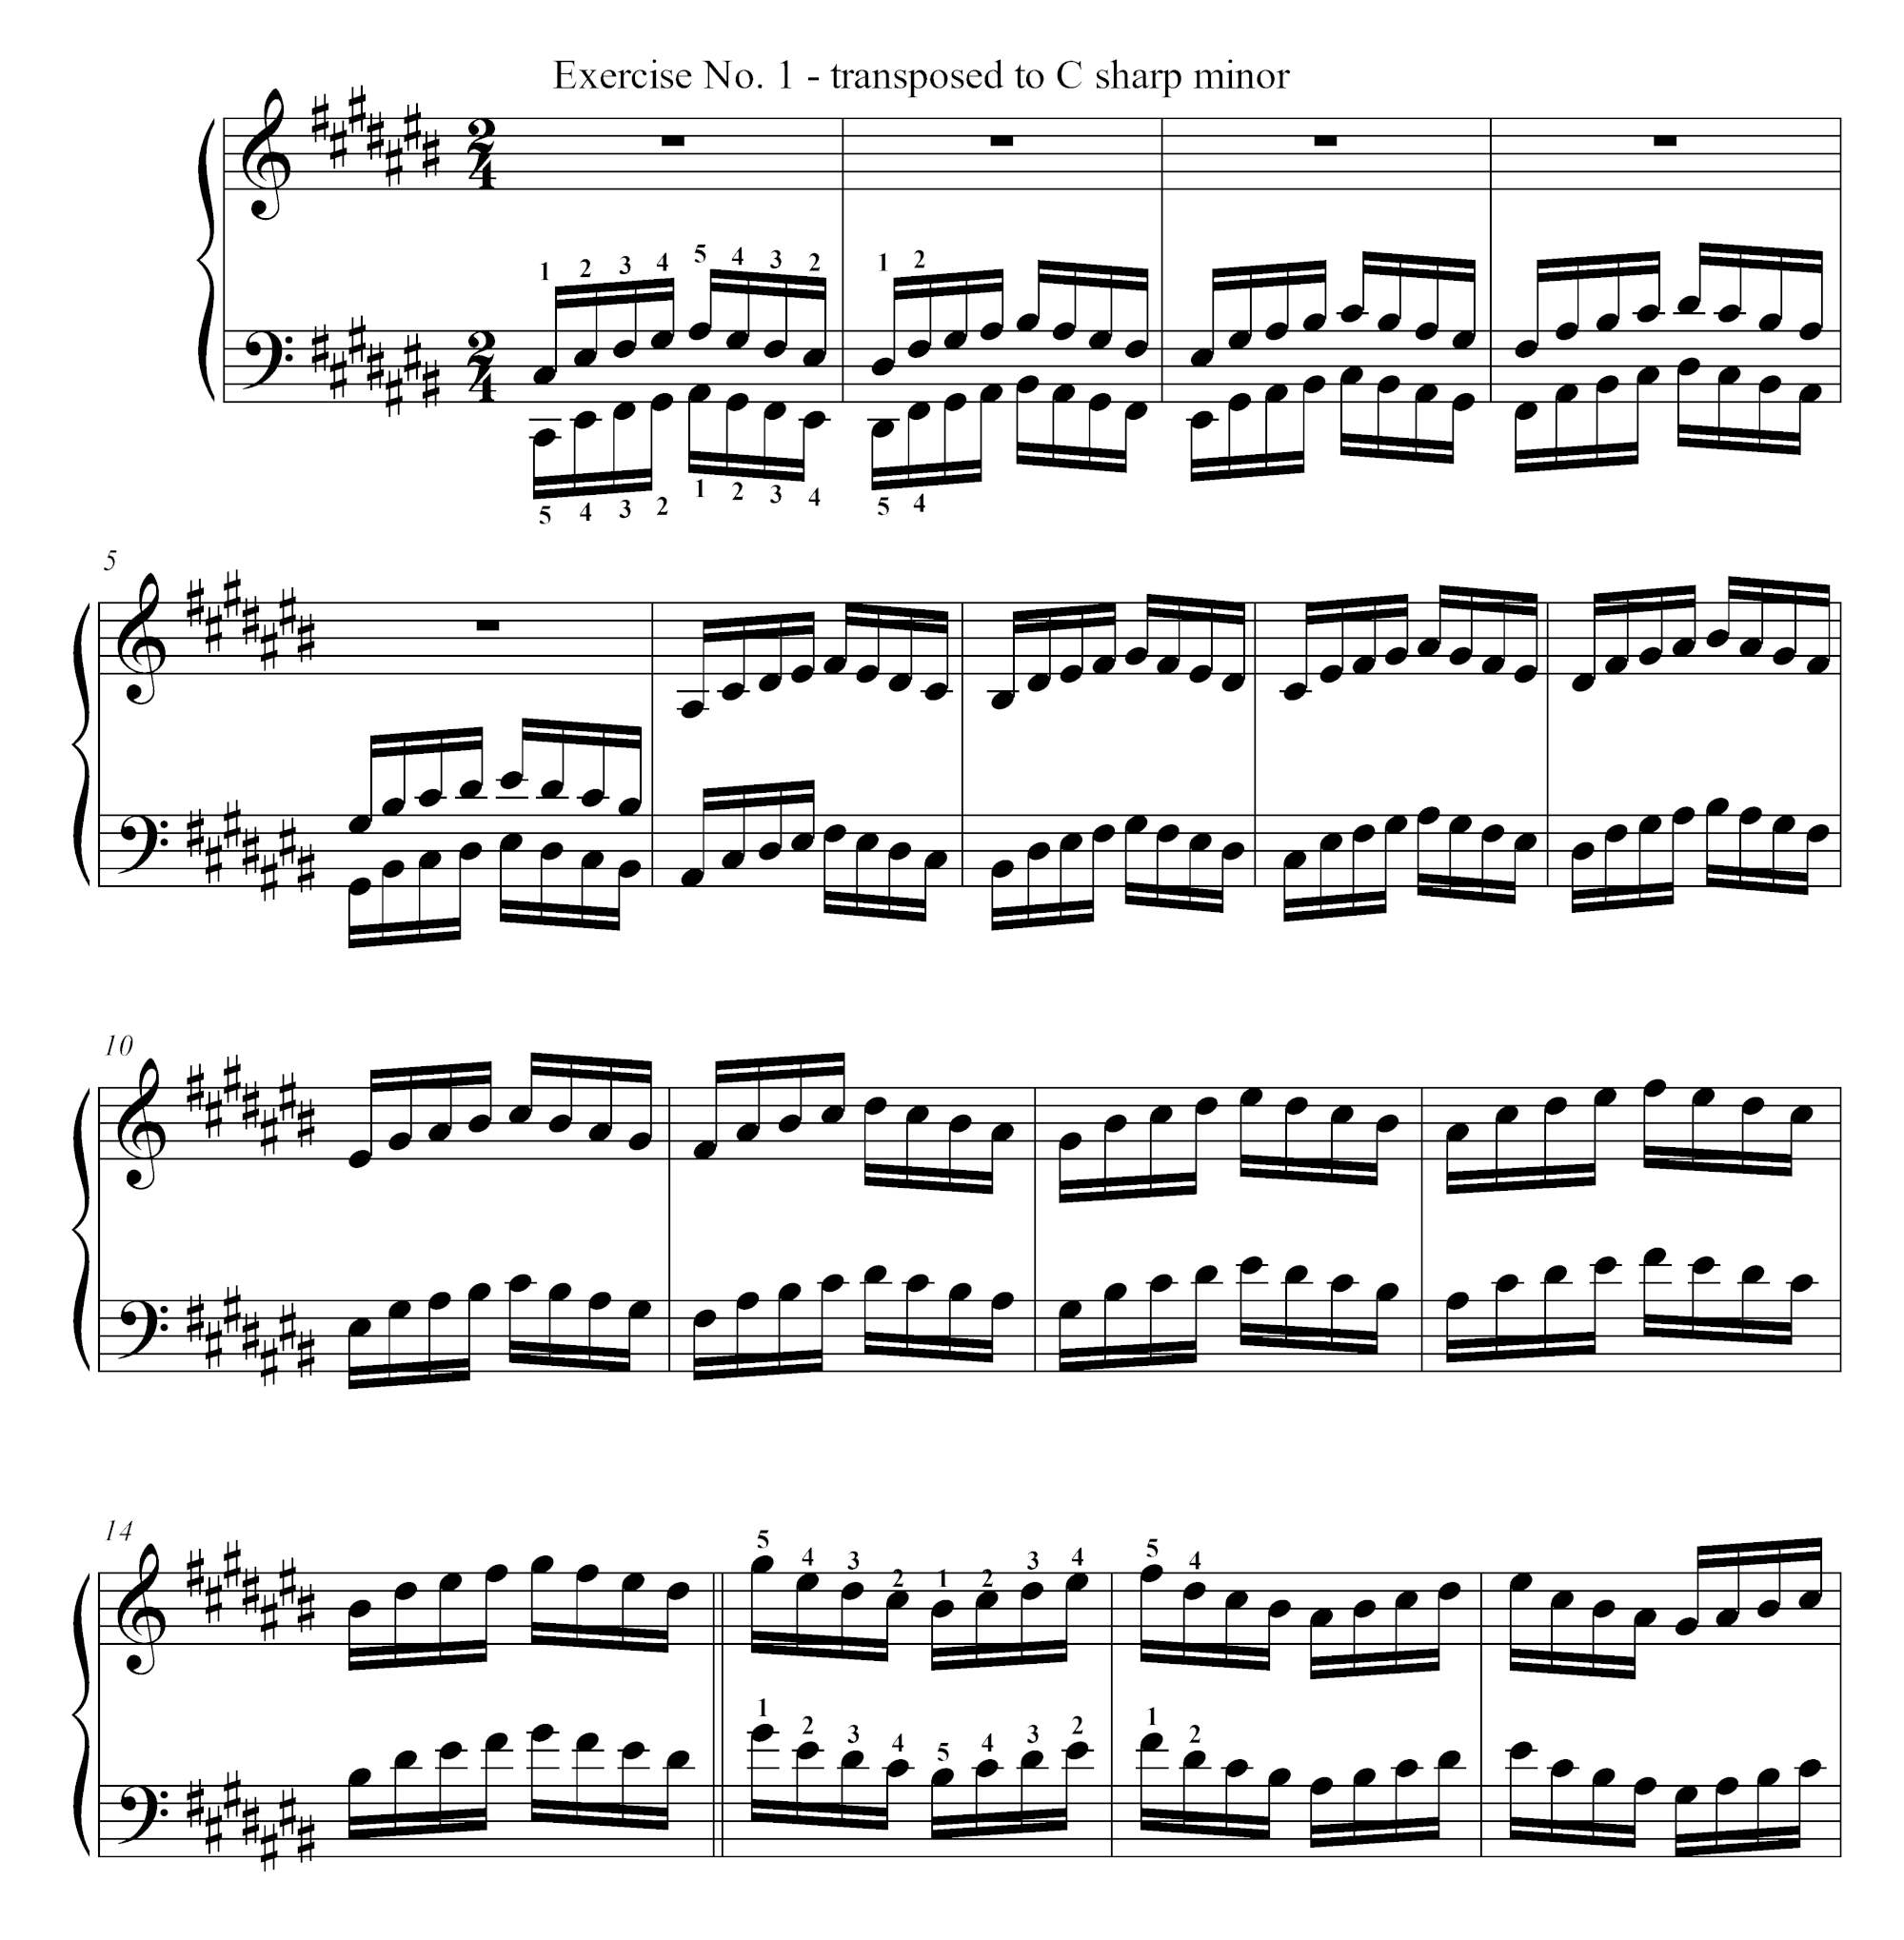 Hanon-Exercise-transposed-to-C-sharp-major_Page1